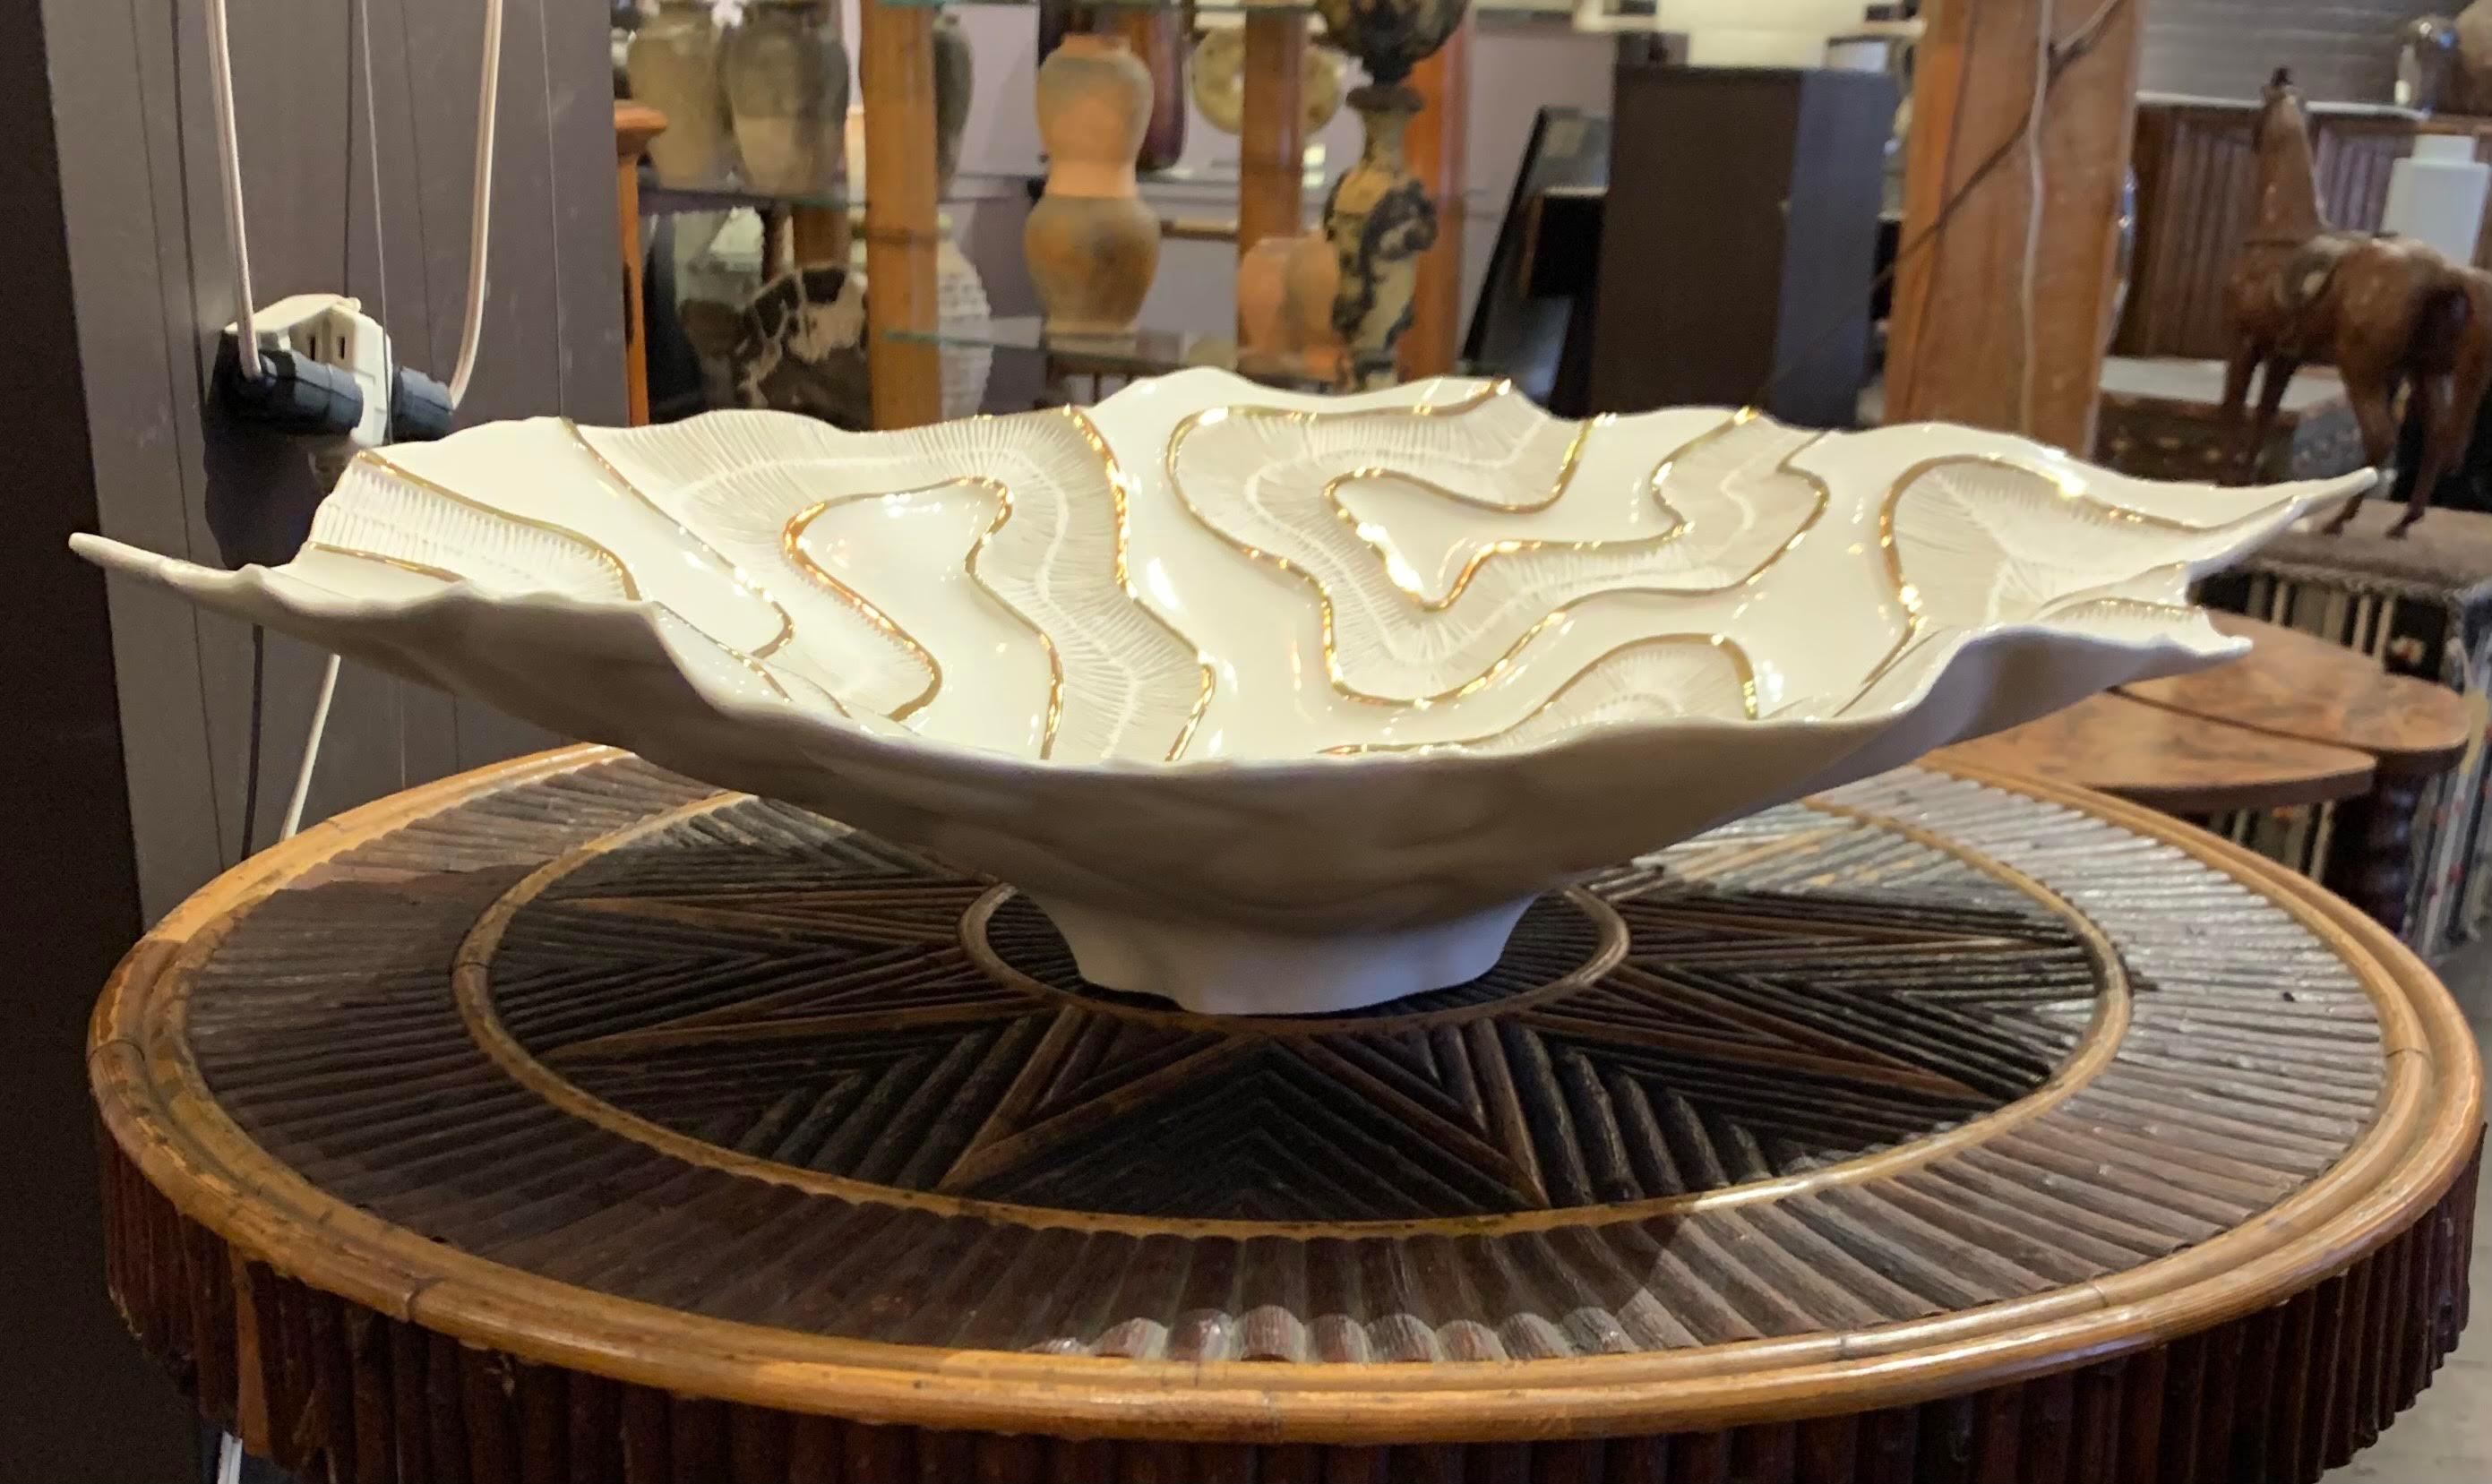 Italian White with Gold Coral Motif Porcelain Bowl, Italy, Contemporary